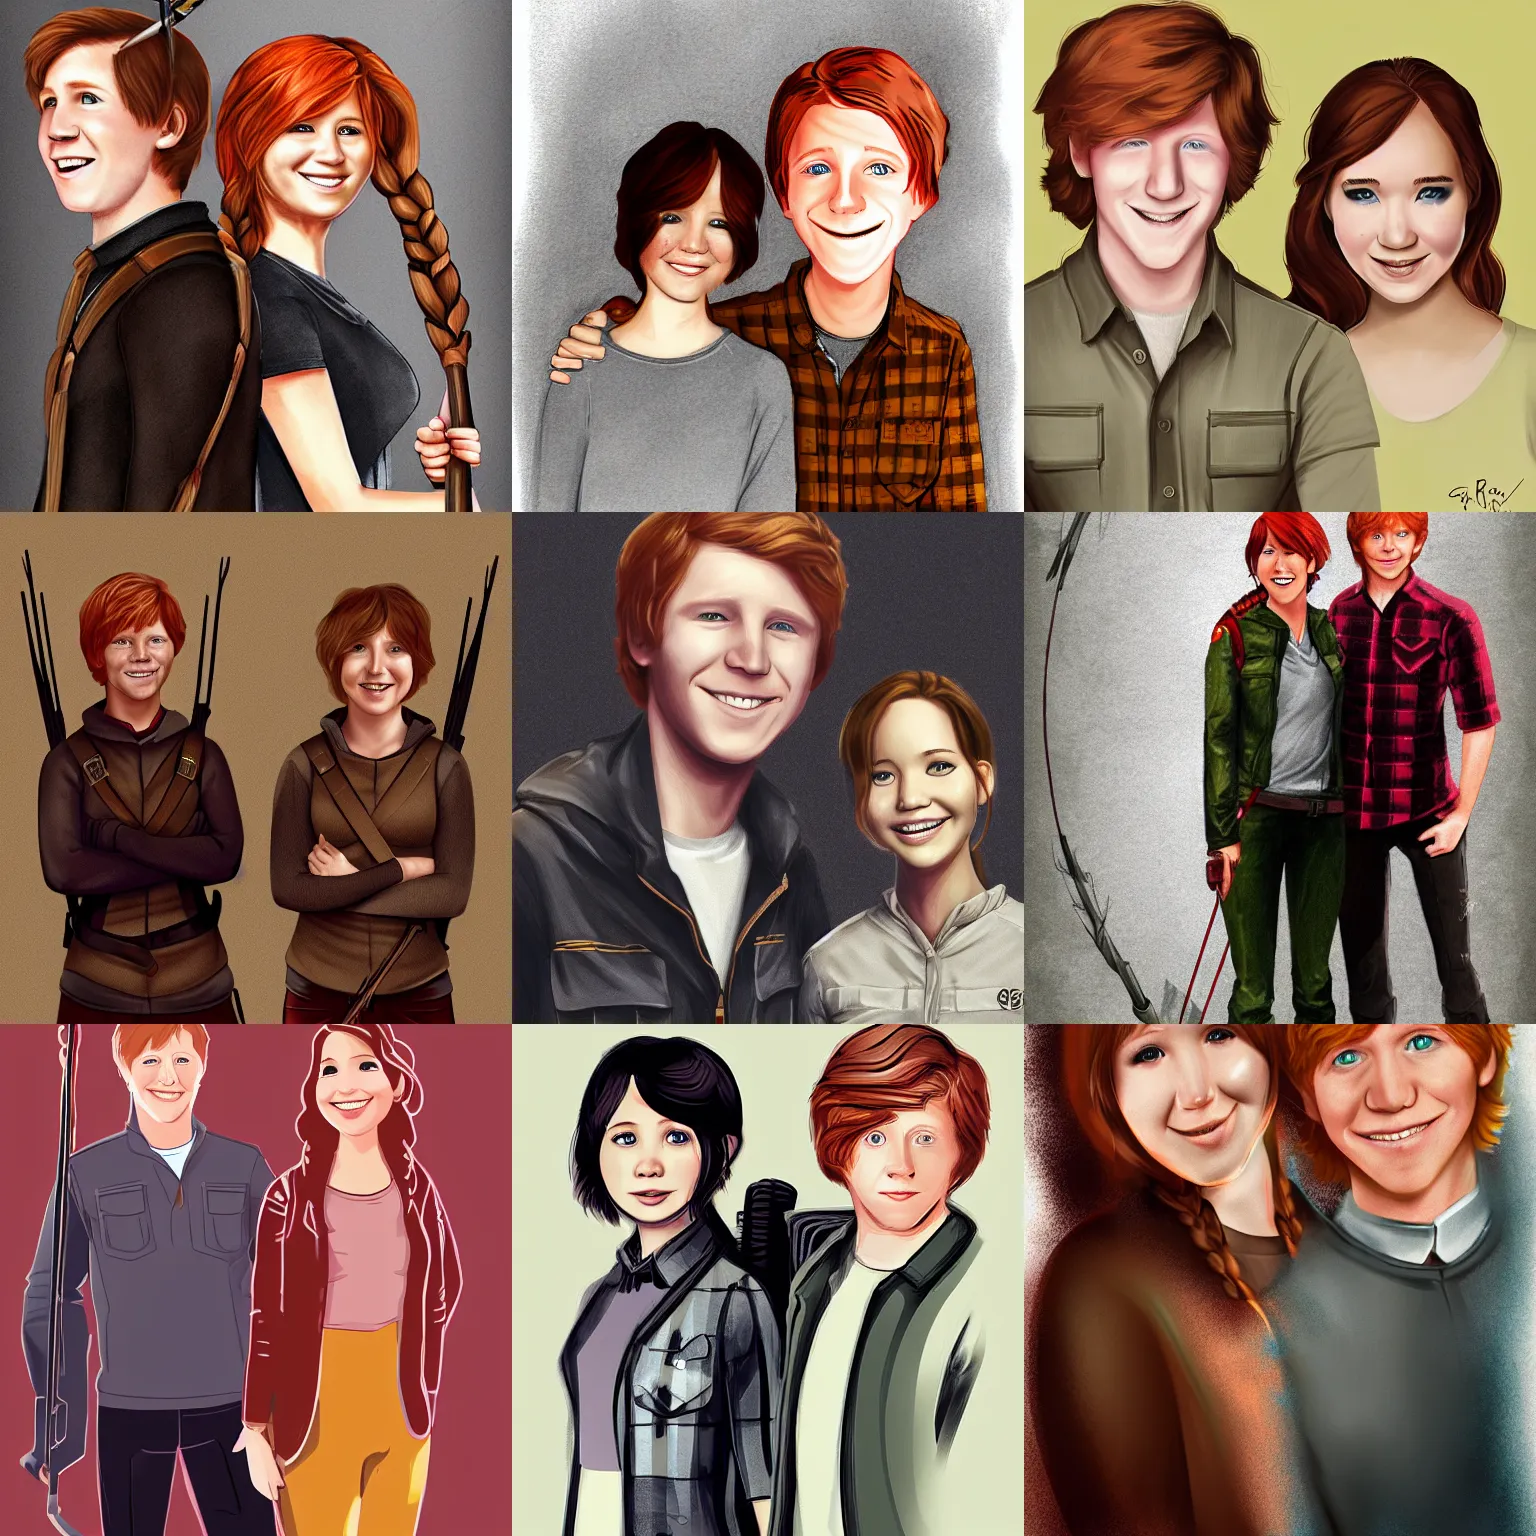 Prompt: Katniss Everdeen standing next to Ron Weasley, both smiling for the camera, digital art by Grey Rutkowski